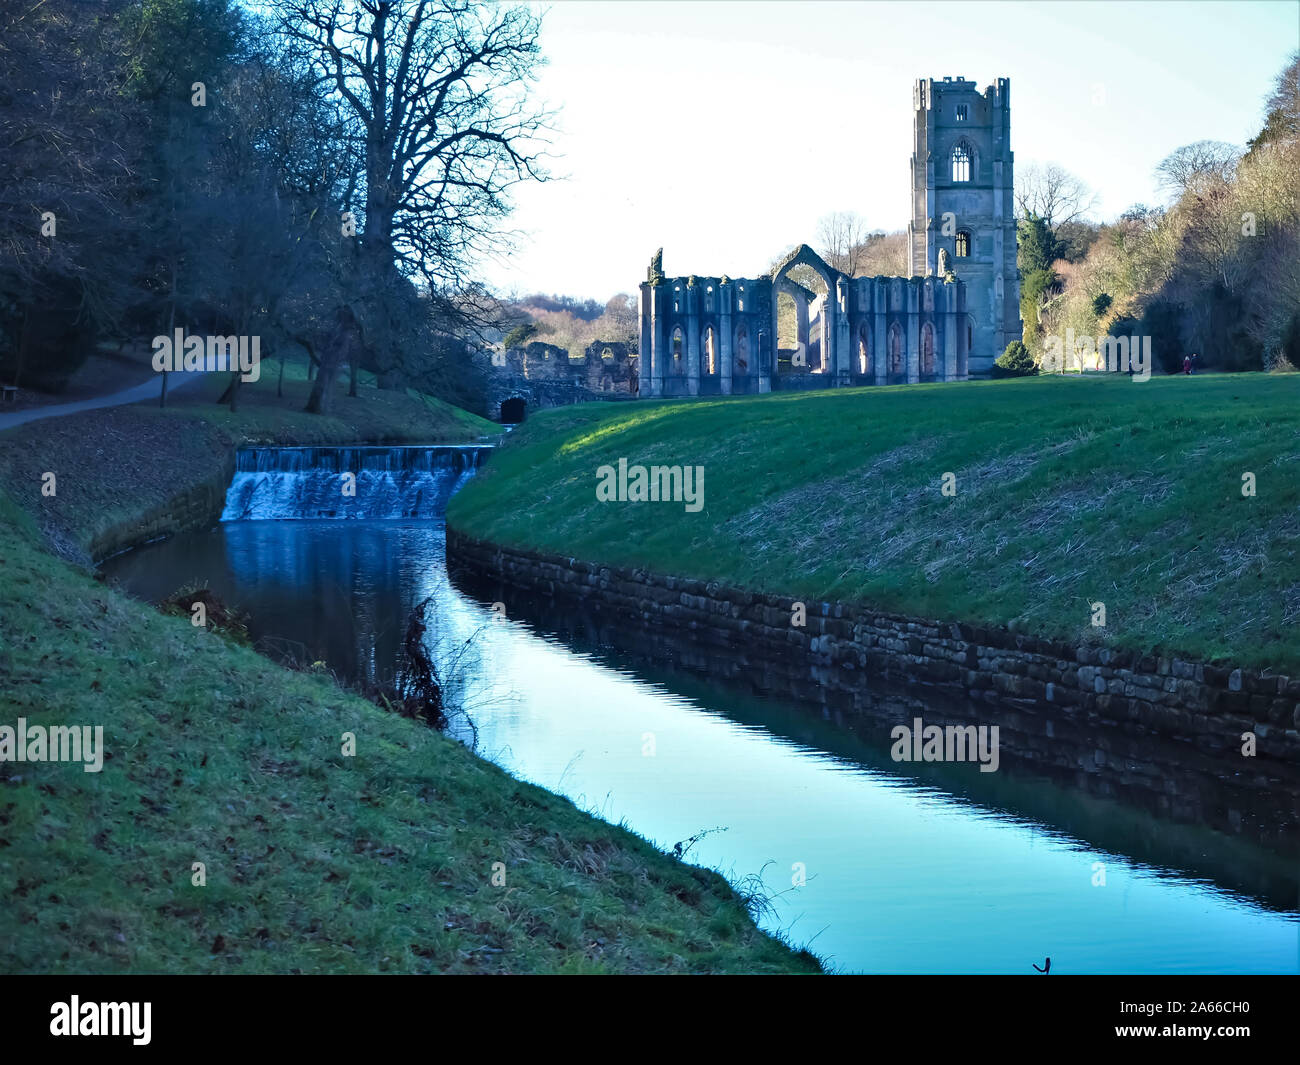 View of Fountains Abbey, North Yorkshire, England, from a path beside the River Skell in the Studley Royal Water Gardens on a frosty morning Stock Photo